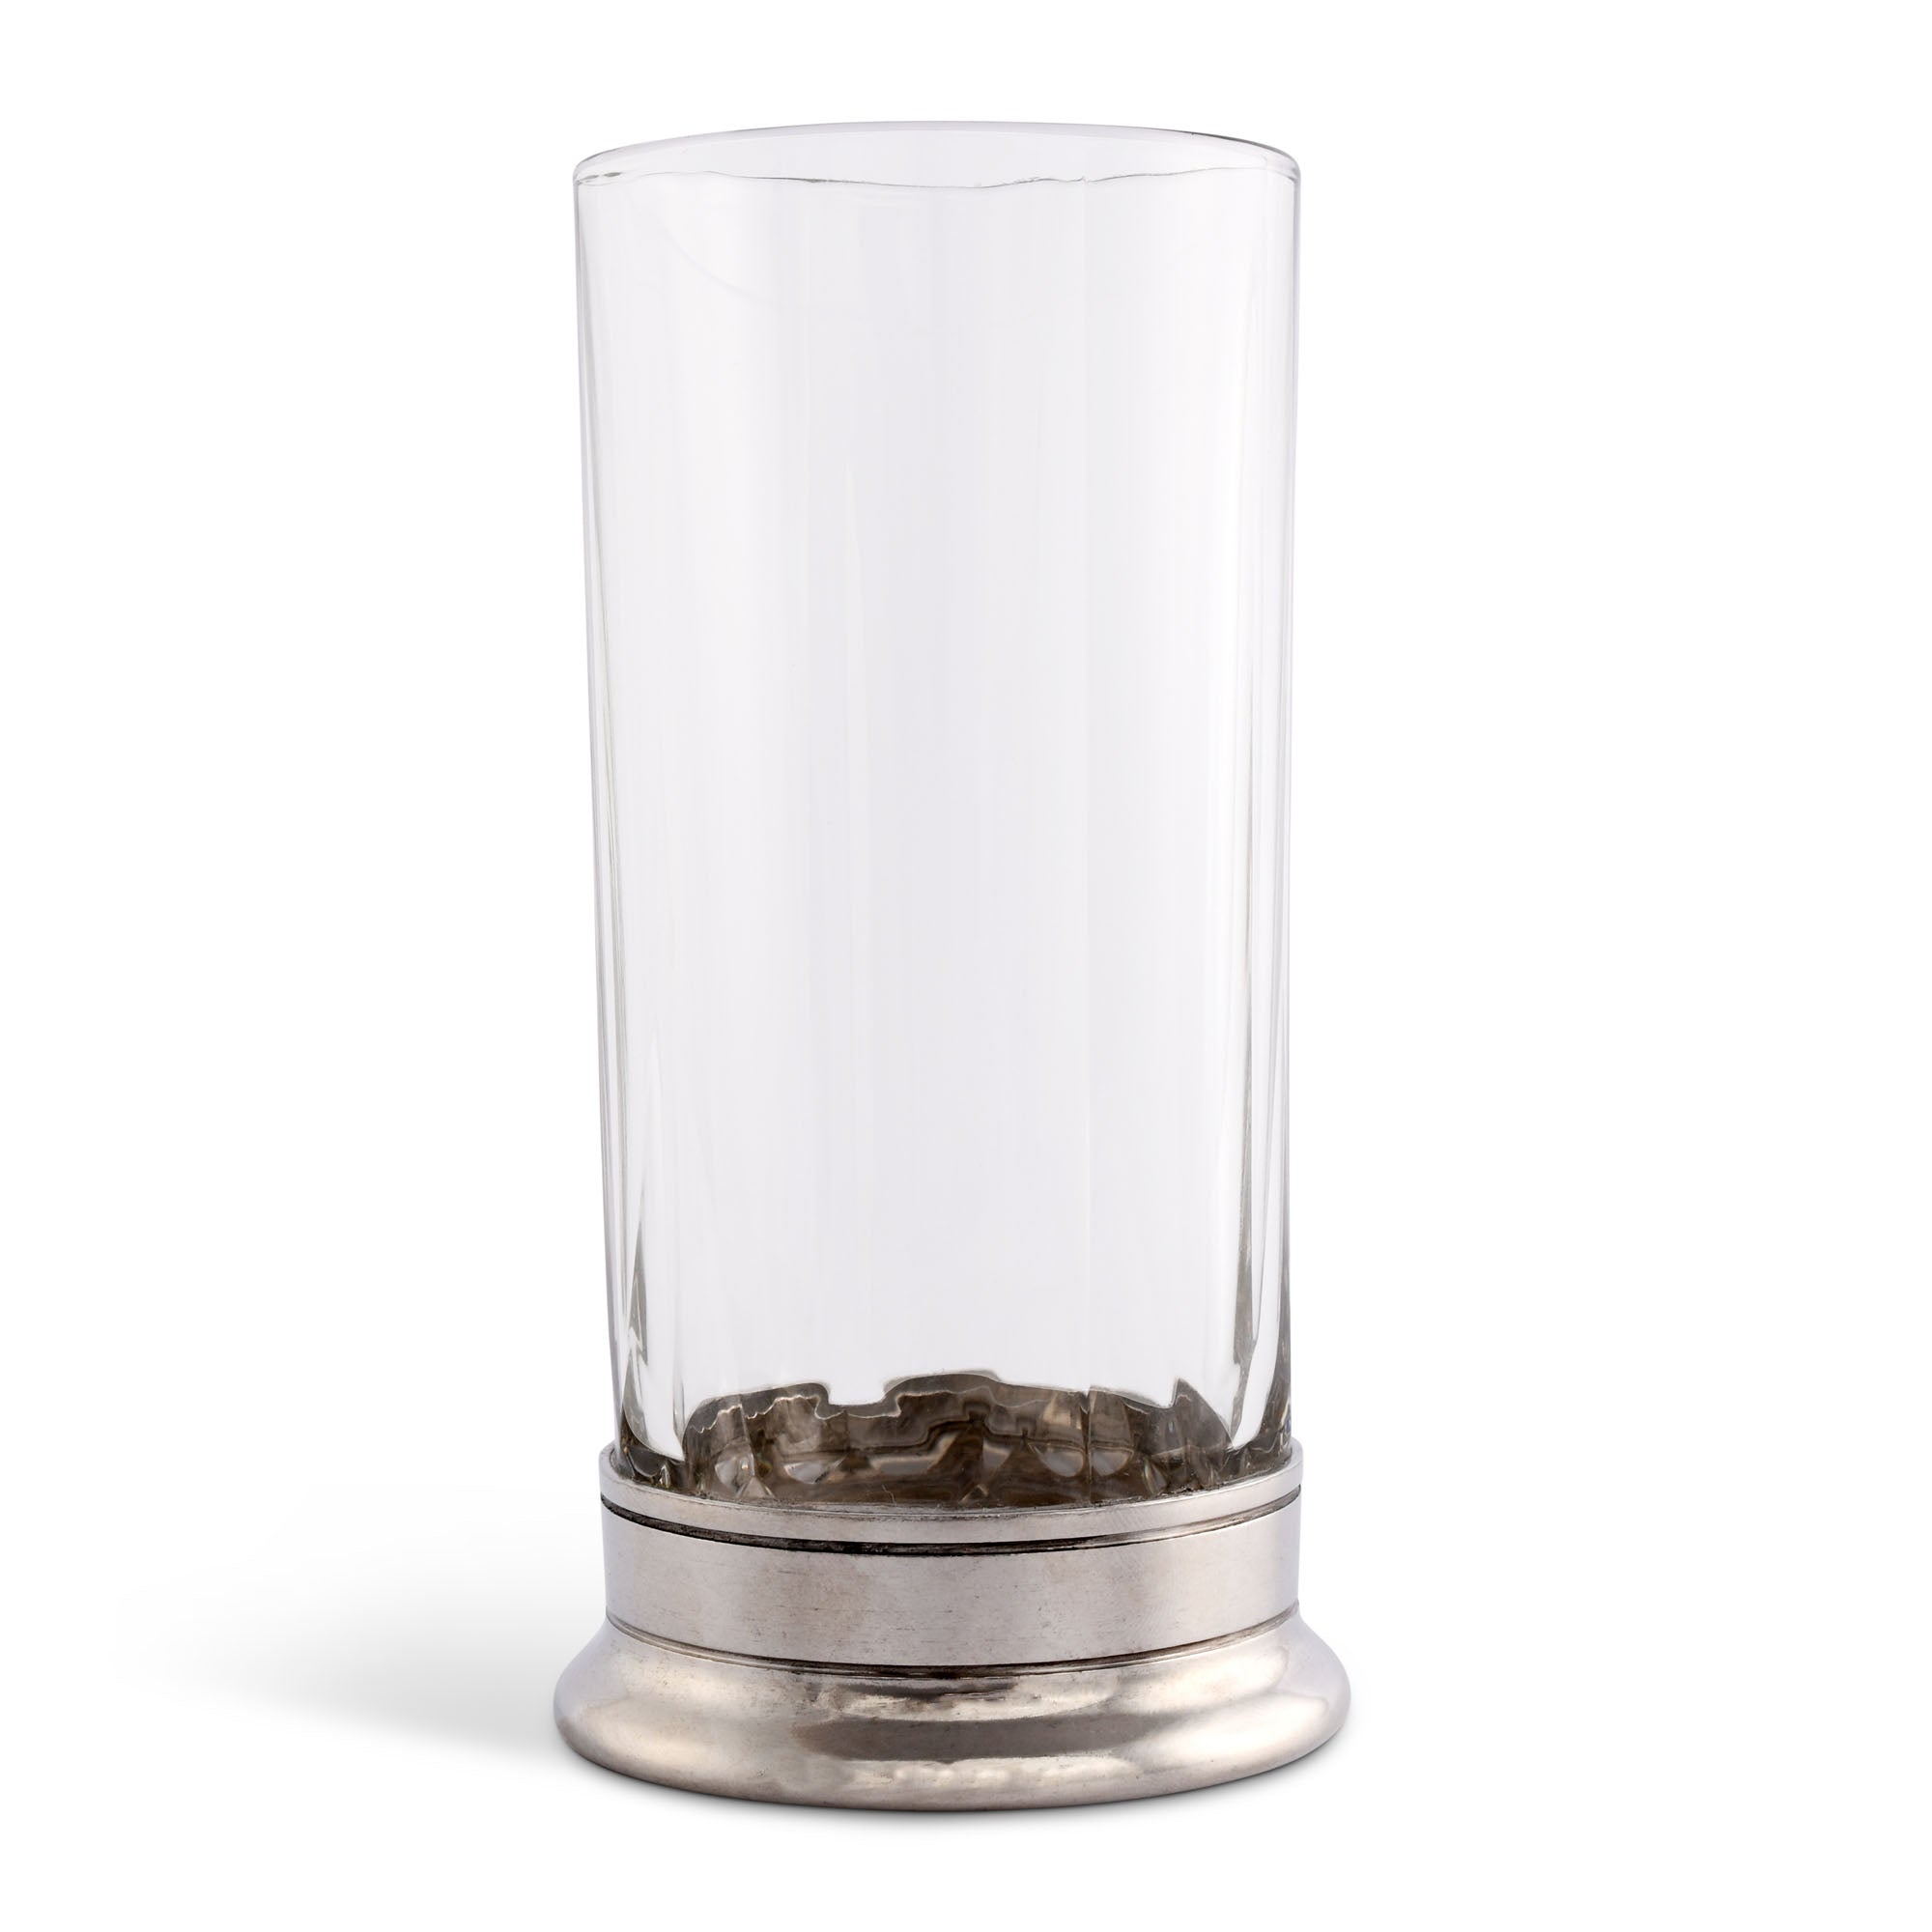 Vagabond House Highball - Hatched Glass Product Image